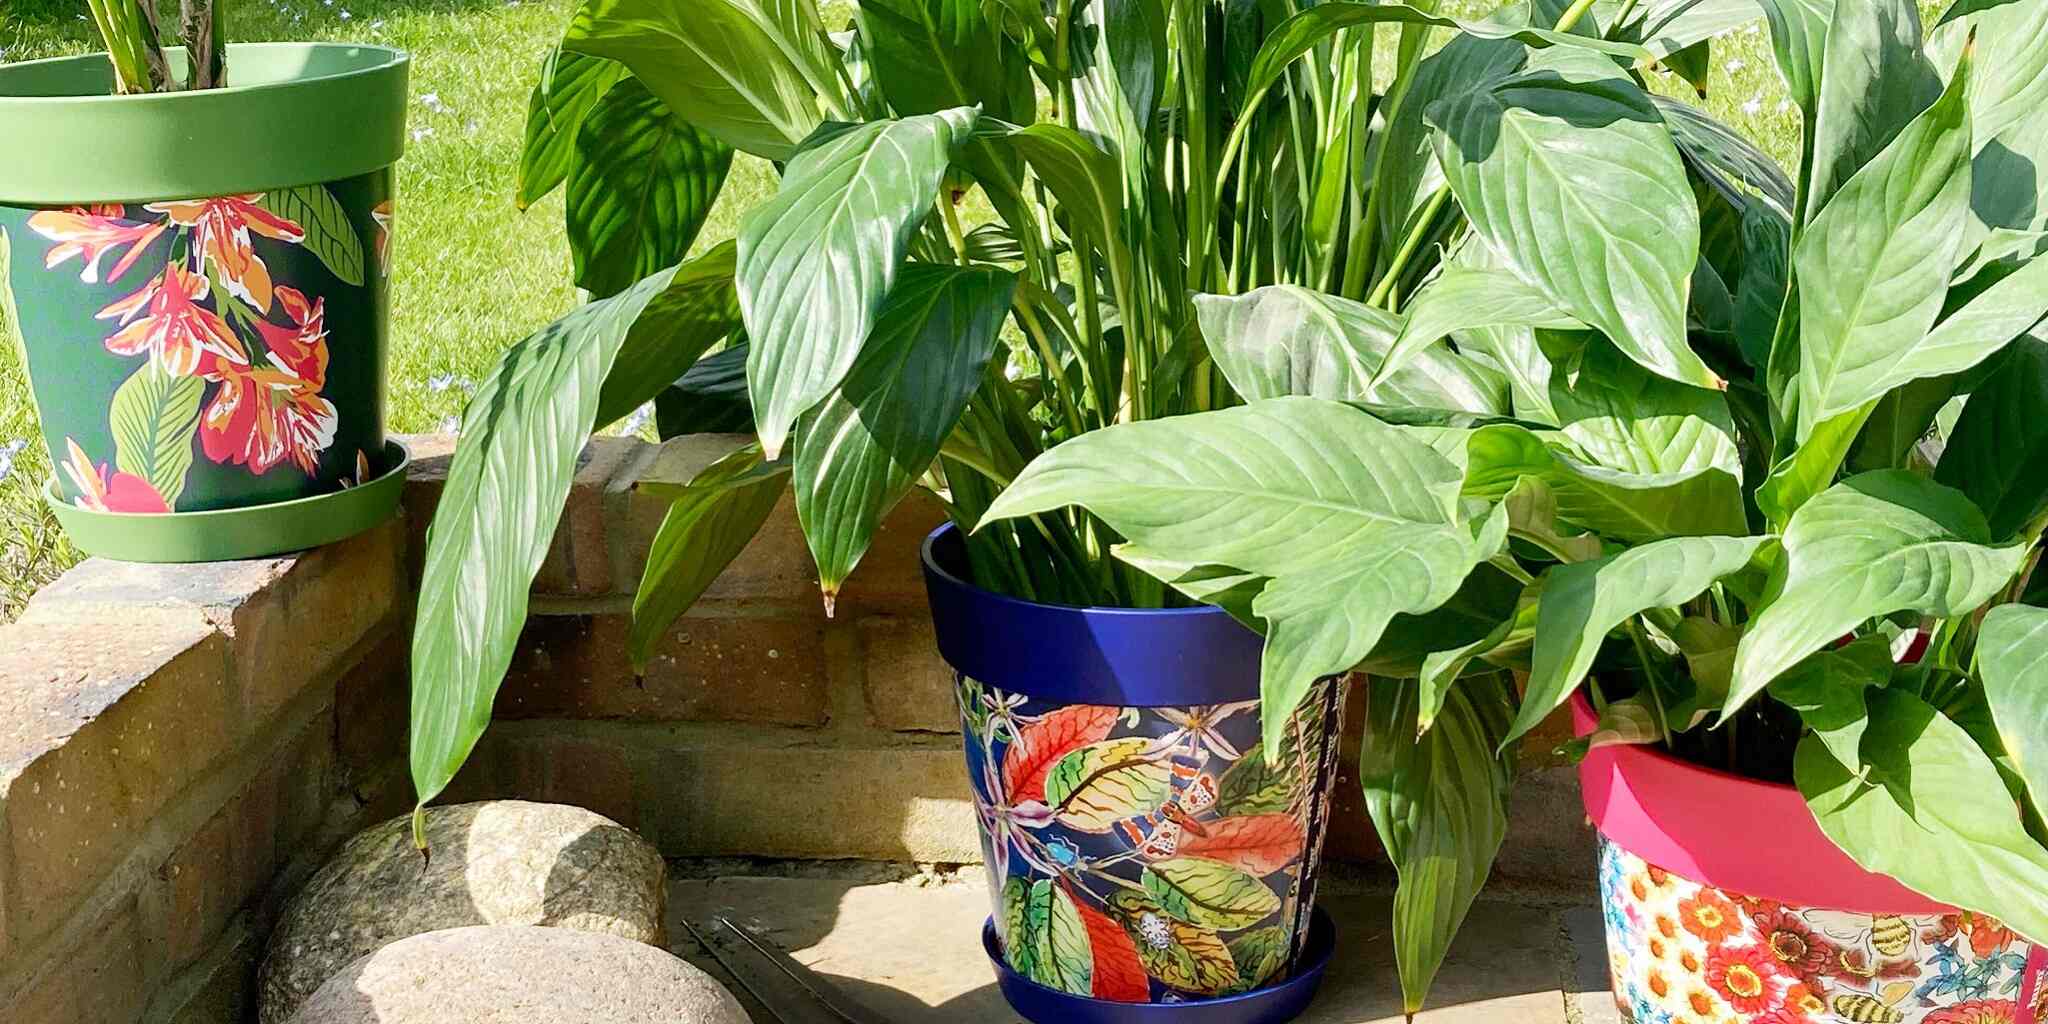 Image of Hum Flowerpots in an outdoor garden setting with plants